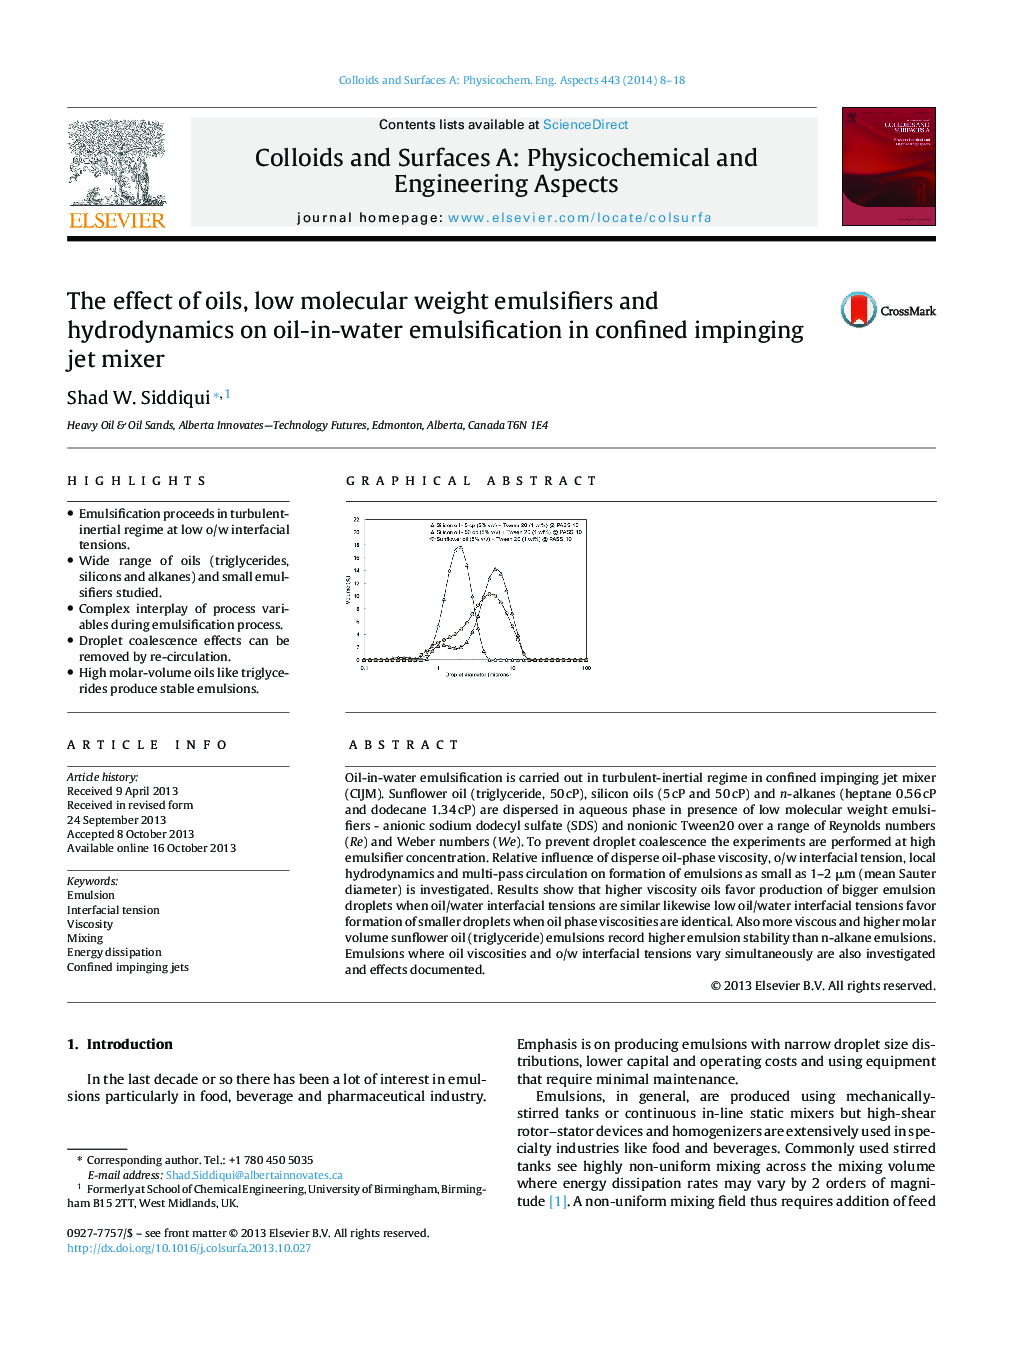 The effect of oils, low molecular weight emulsifiers and hydrodynamics on oil-in-water emulsification in confined impinging jet mixer